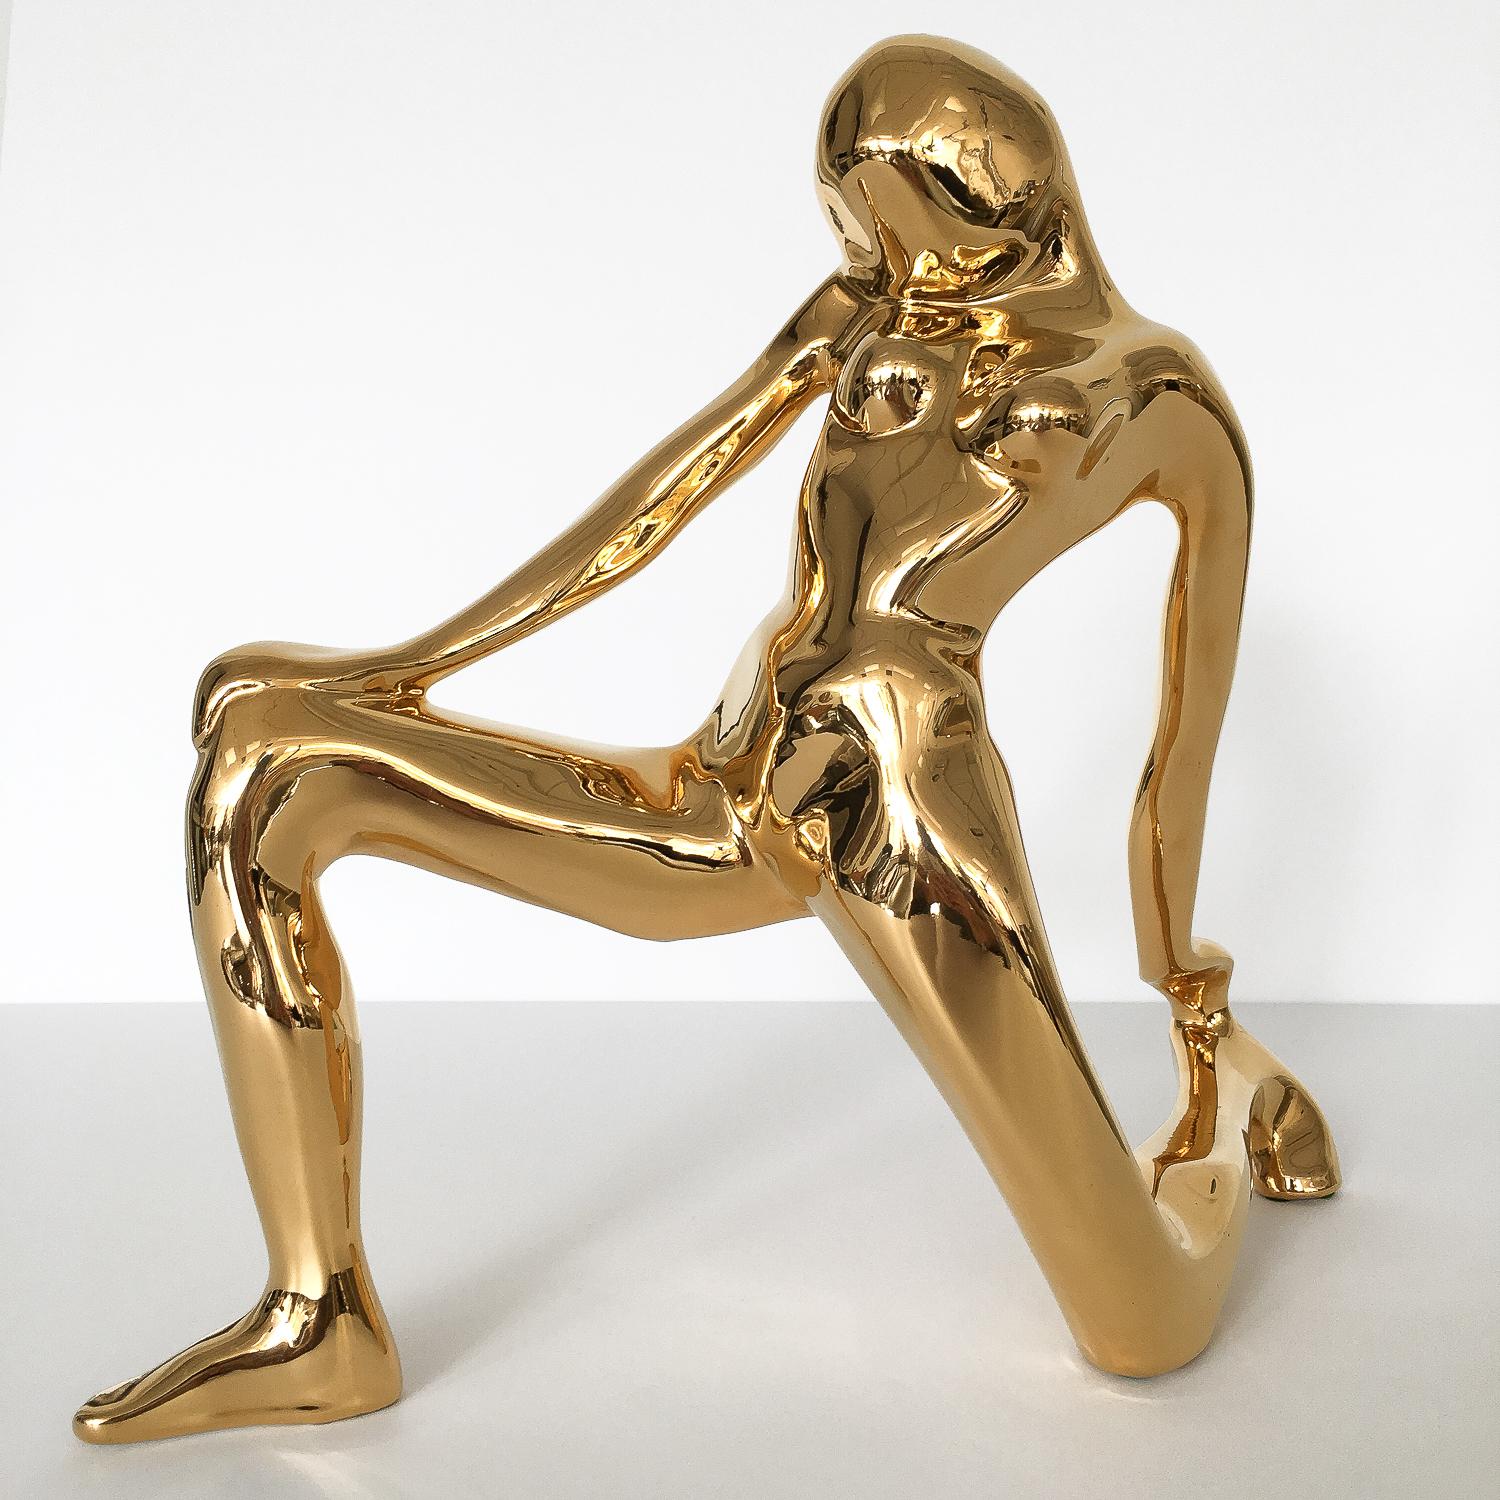 Modernist gold-plated ceramic sculpture of a stylized kneeling woman by Jaru of California, circa 1980. Signed 